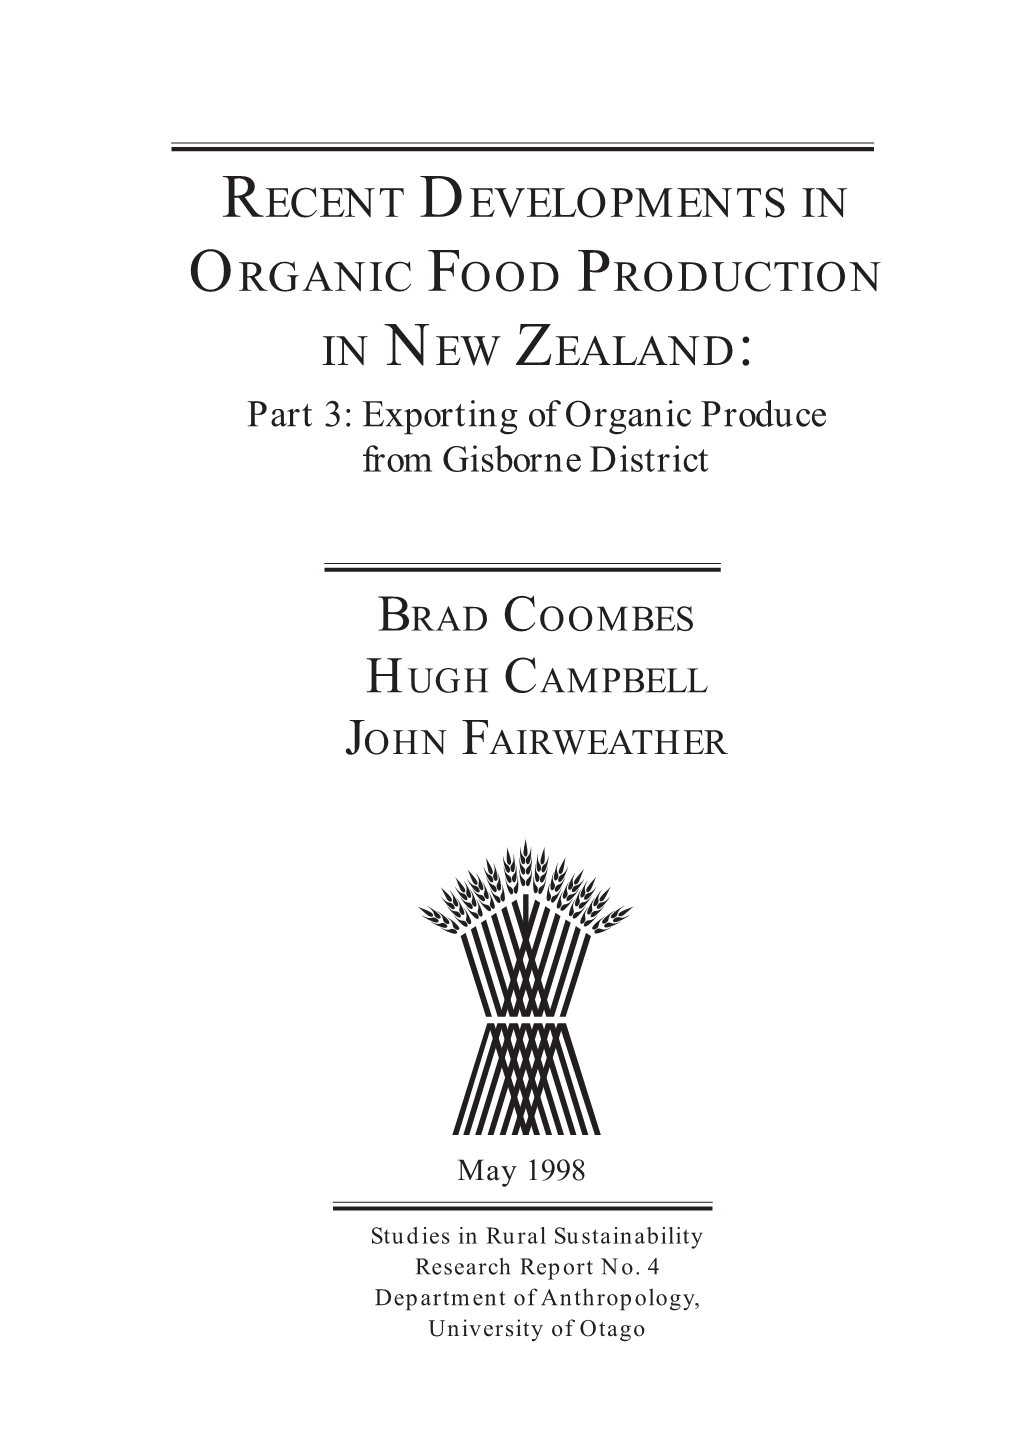 RECENT DEVELOPMENTS in ORGANIC FOOD PRODUCTION in NEW ZEALAND: Part 3: Exporting of Organic Produce from Gisborne District